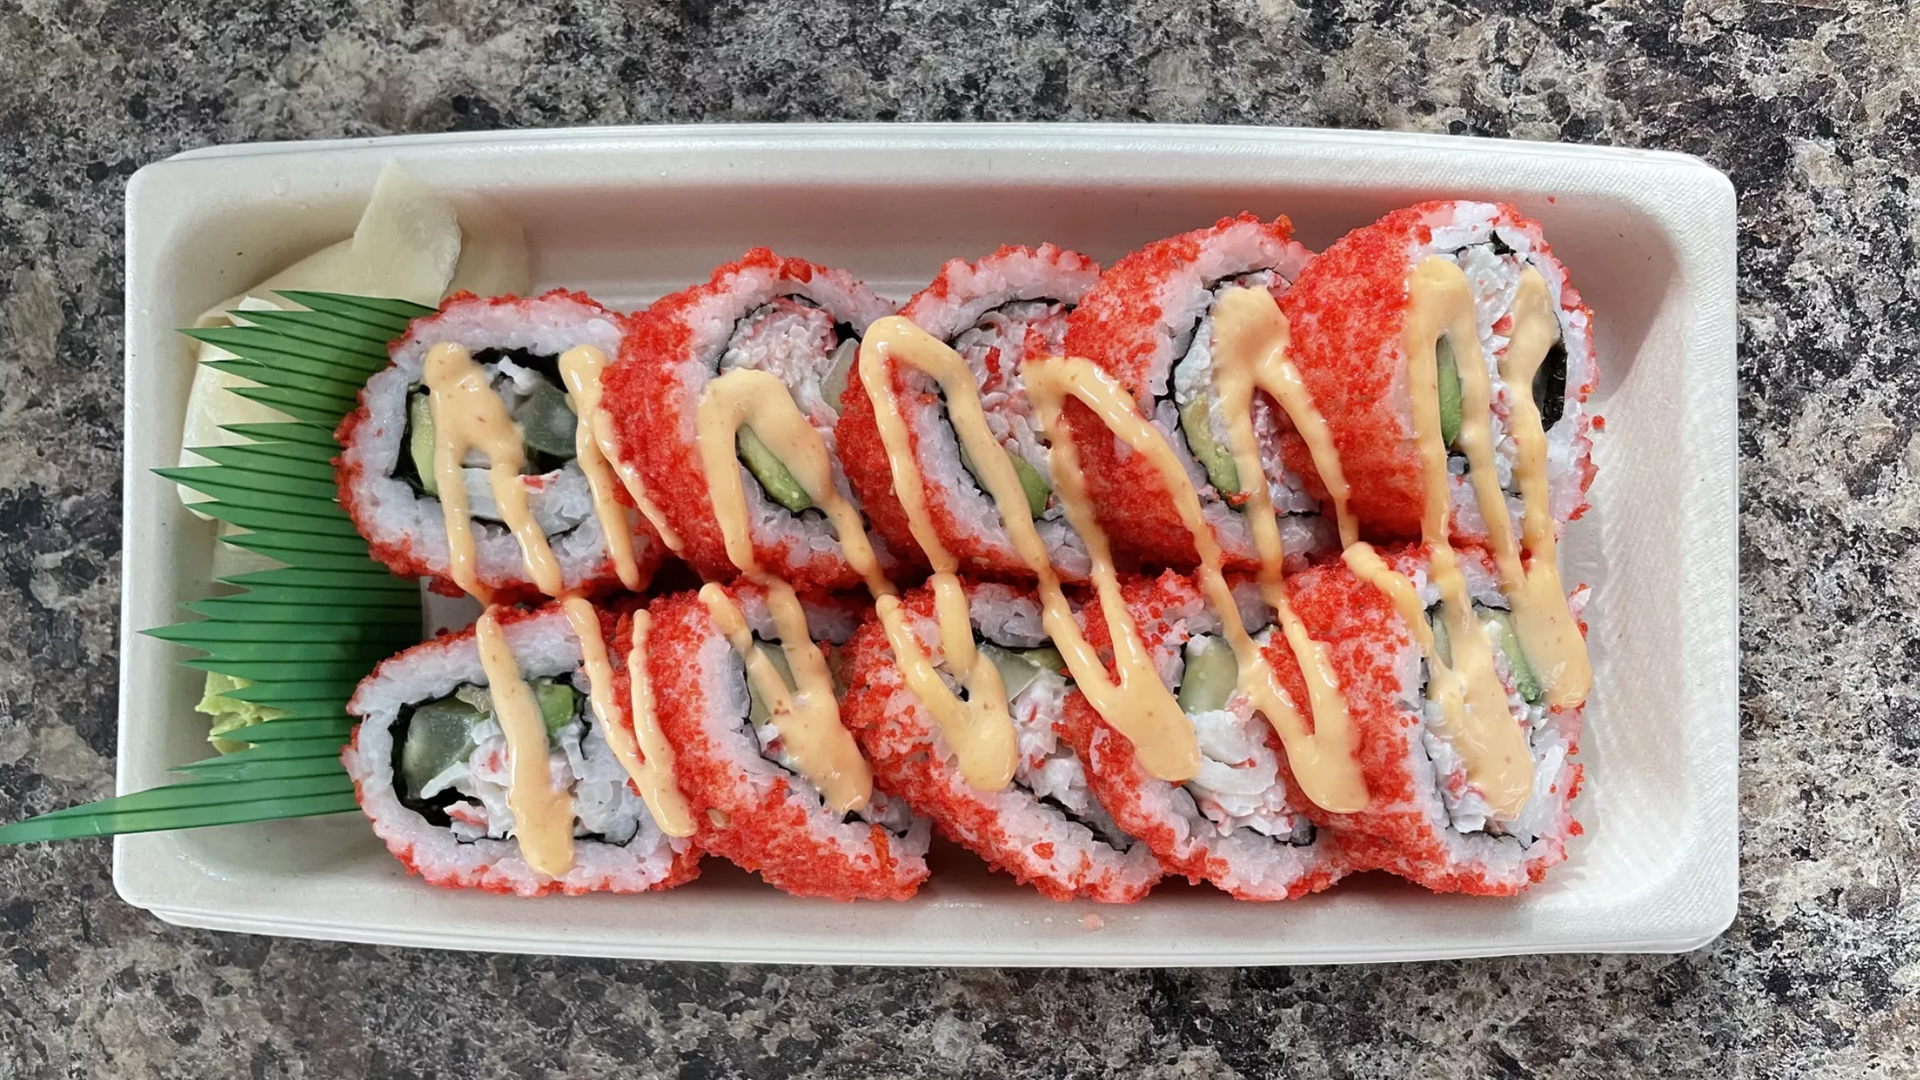 A hot cheeto sushi roll from Hy-Vee.